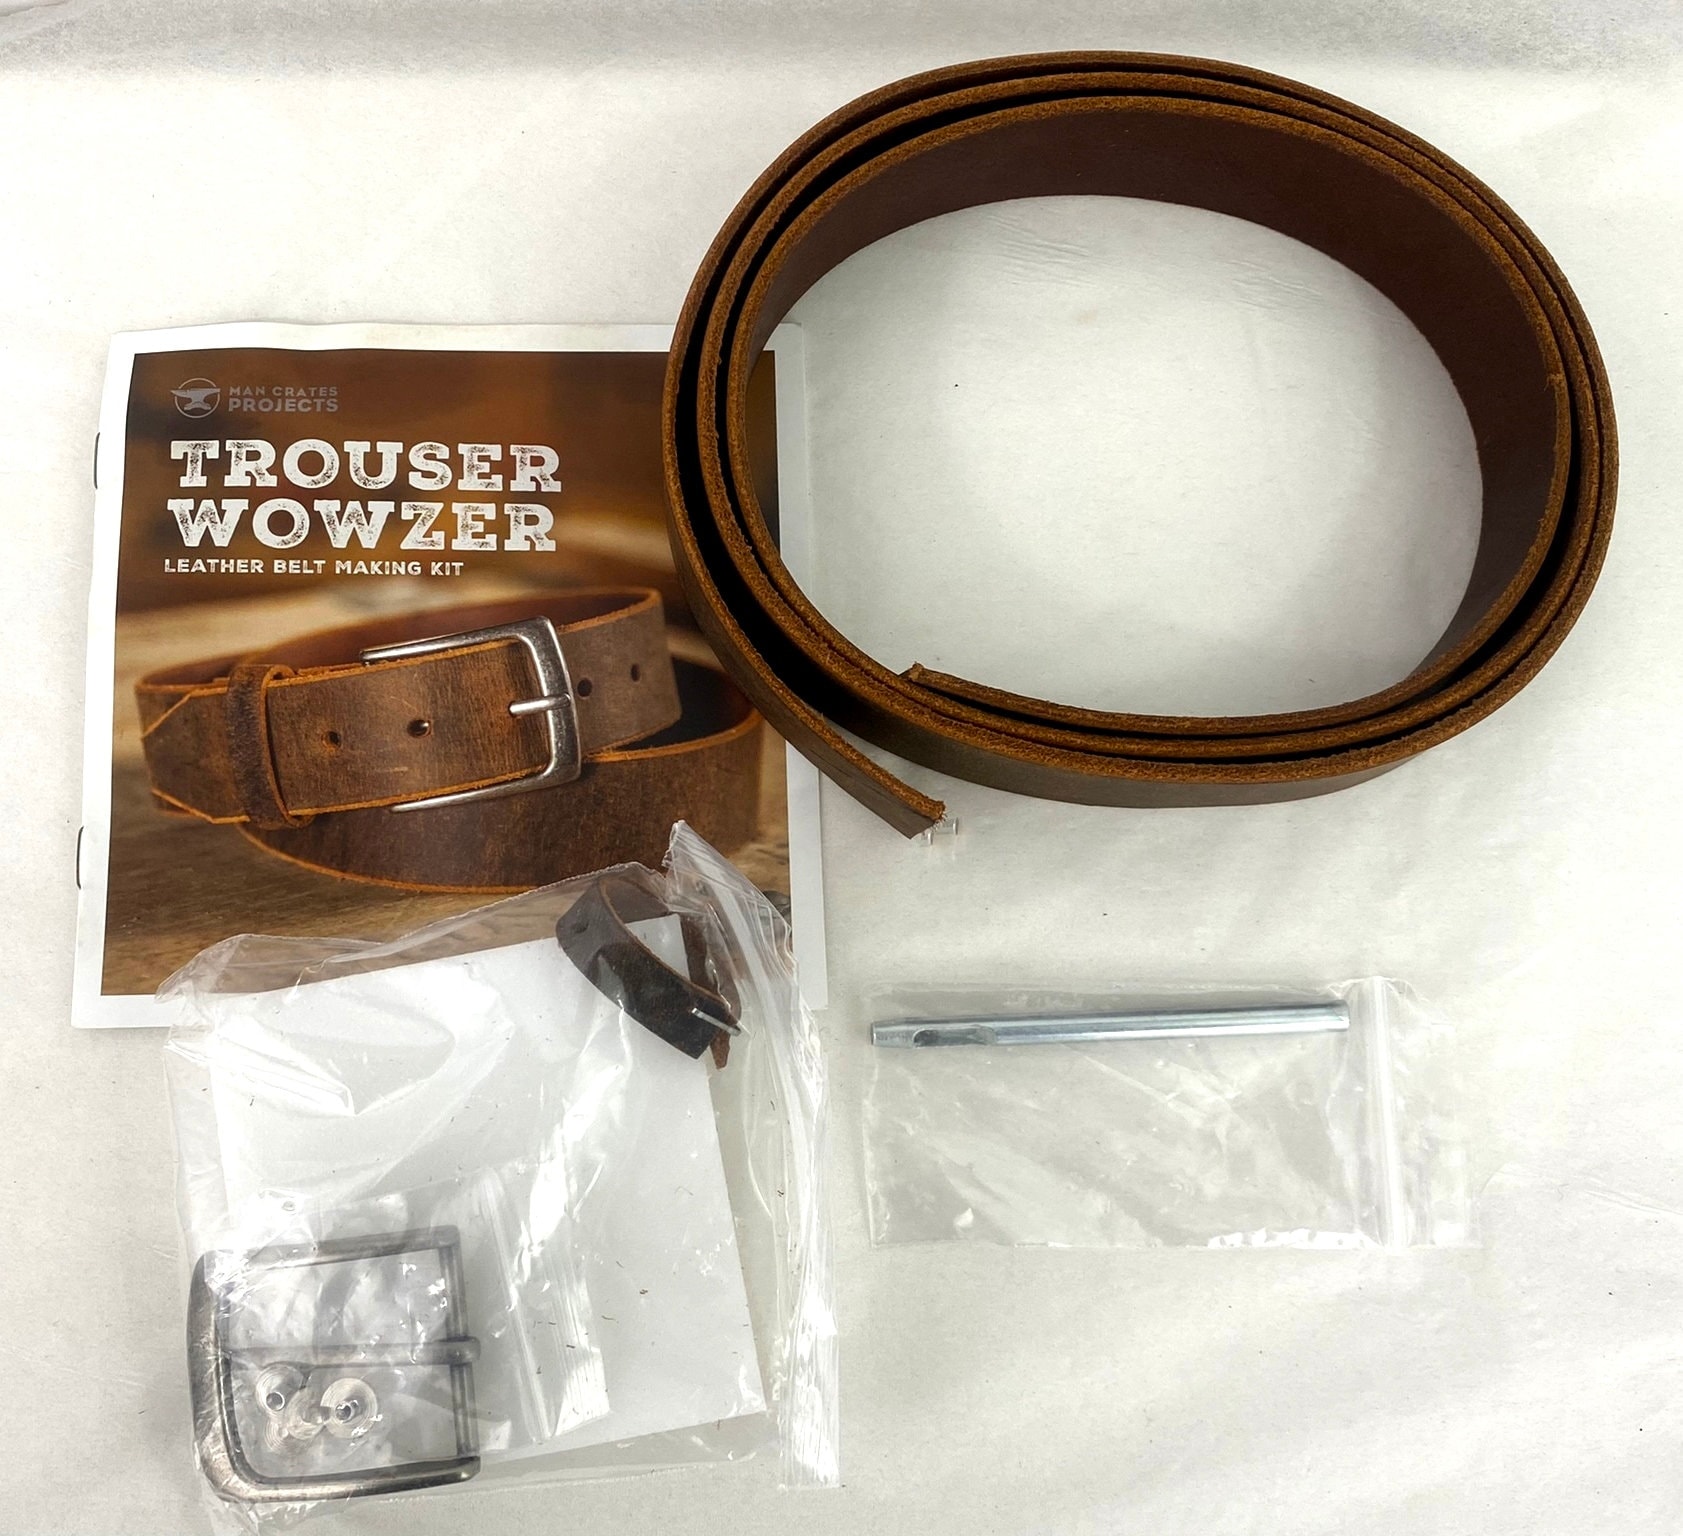 Man Crates Project Leather Belt Making Kit trouser 